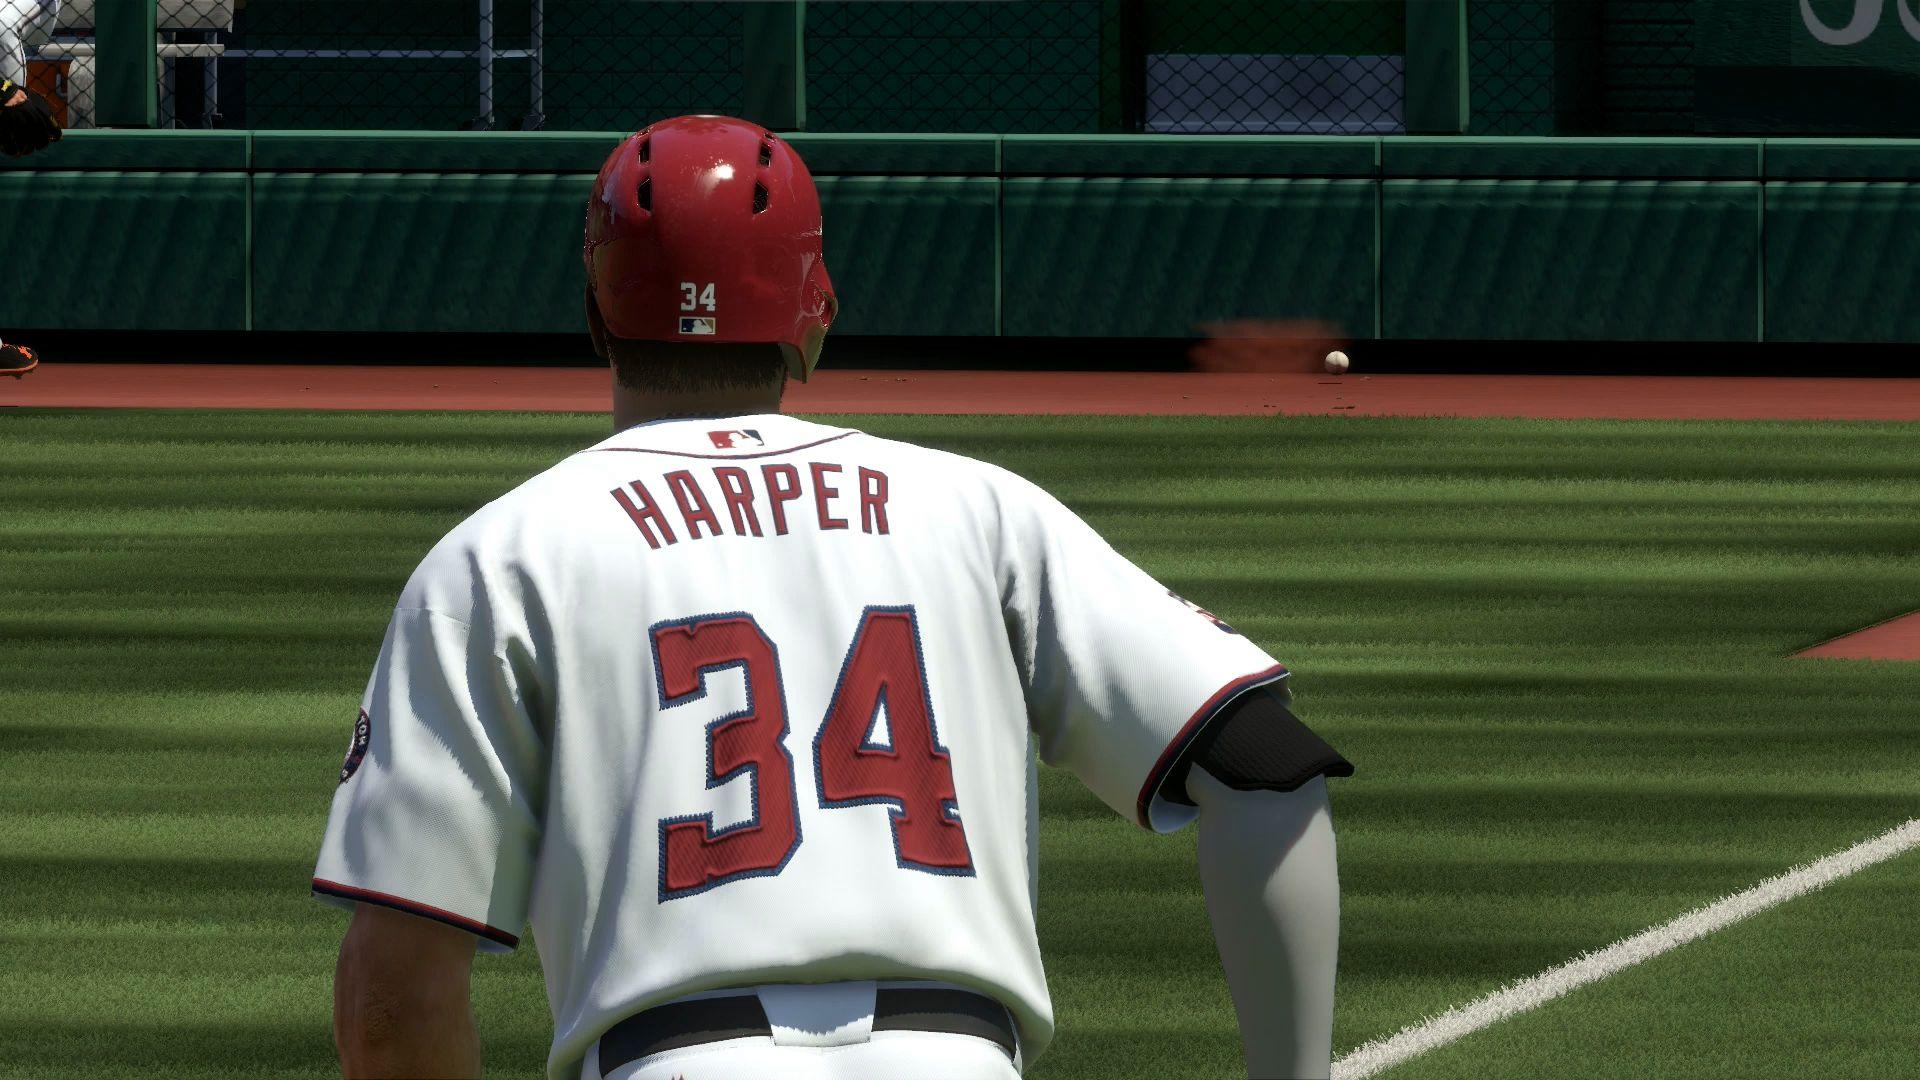 Hit the Pass. Bryce Harper is sparkling like a Diamond